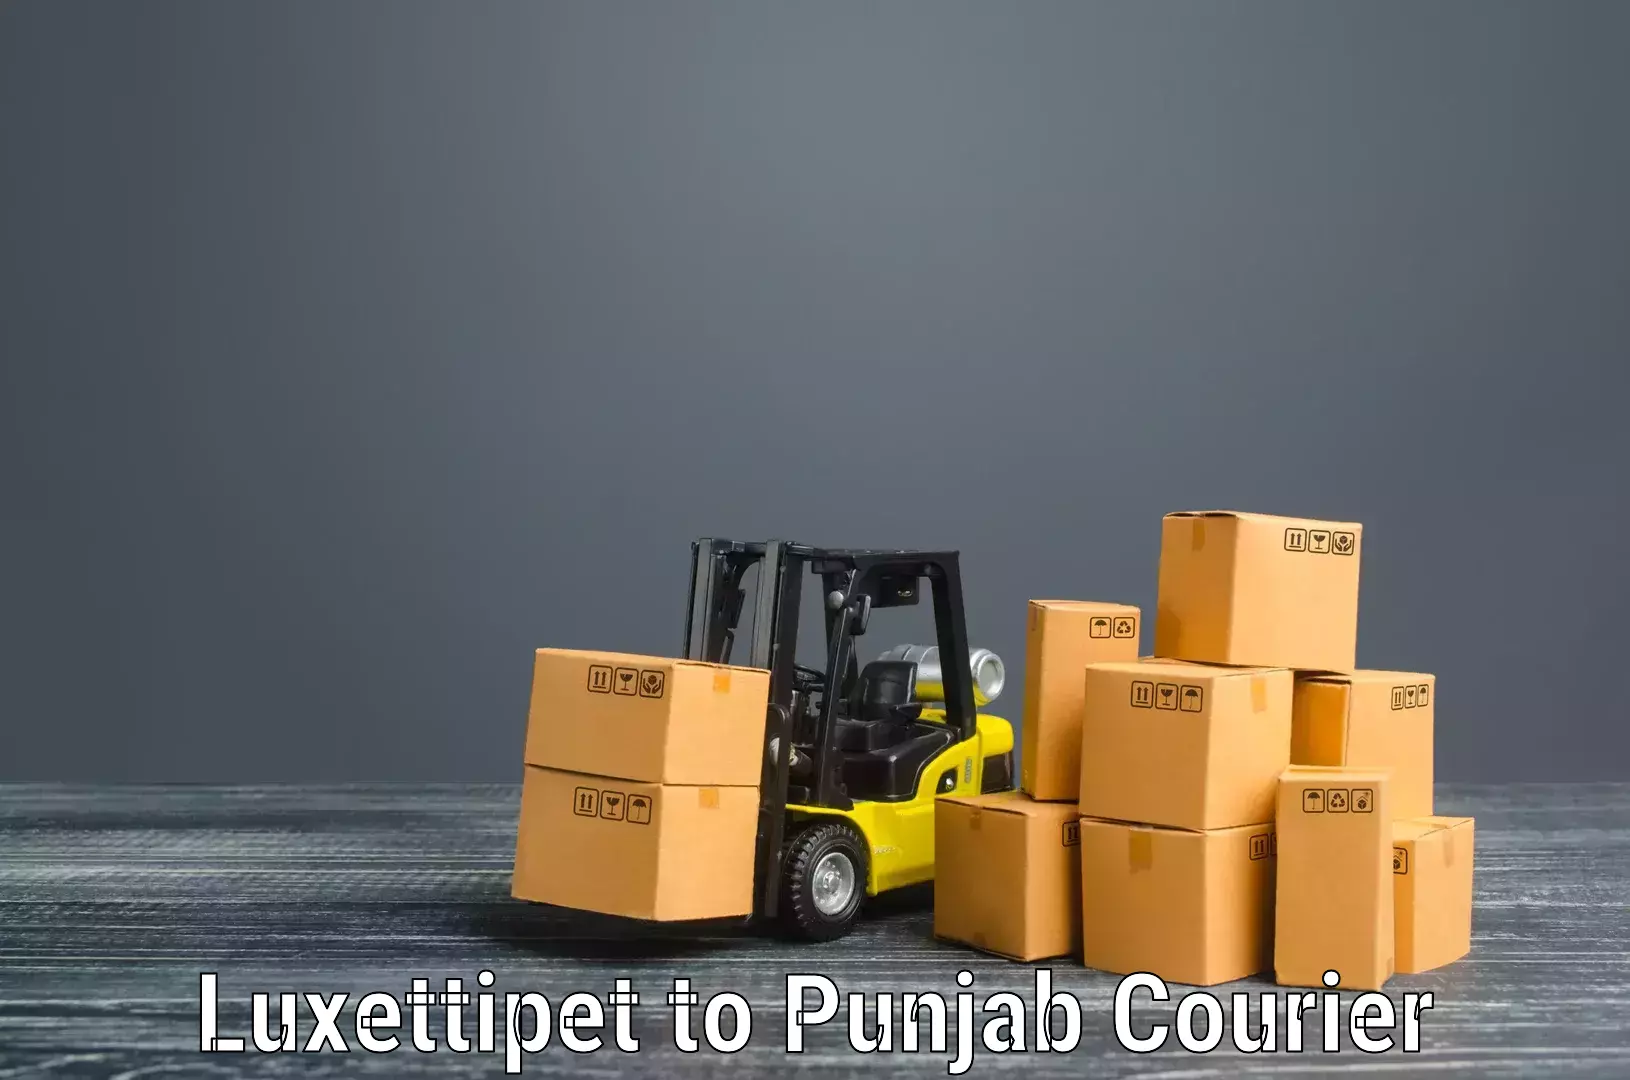 Moving and packing experts Luxettipet to Phagwara